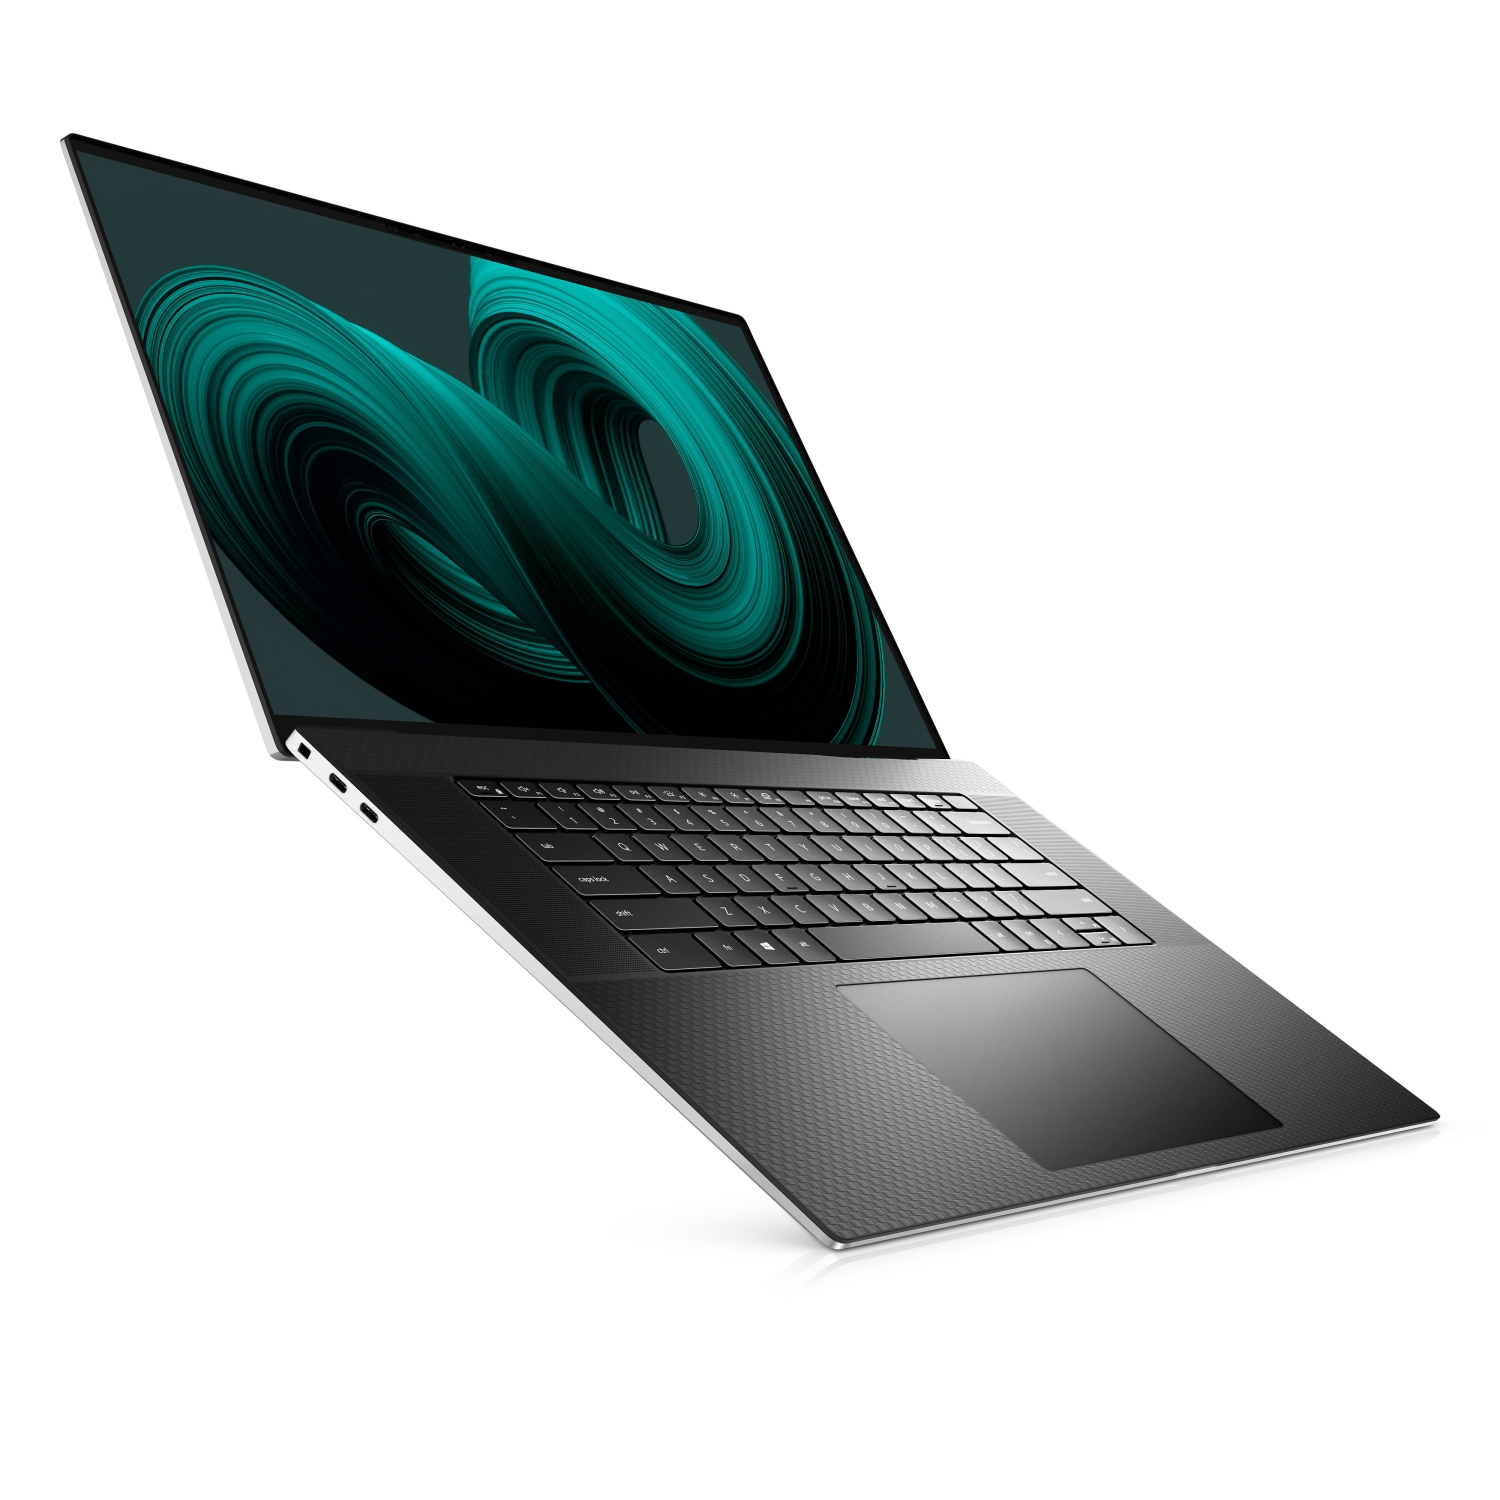 Refurbished (Excellent) - Dell XPS 17 9710 Laptop (2021) | 17" FHD+ | Core i7 - 2TB SSD - 32GB RAM - RTX 3050 | 8 Cores @ 4.6 GHz - 11th Gen CPU Certified Refurbished